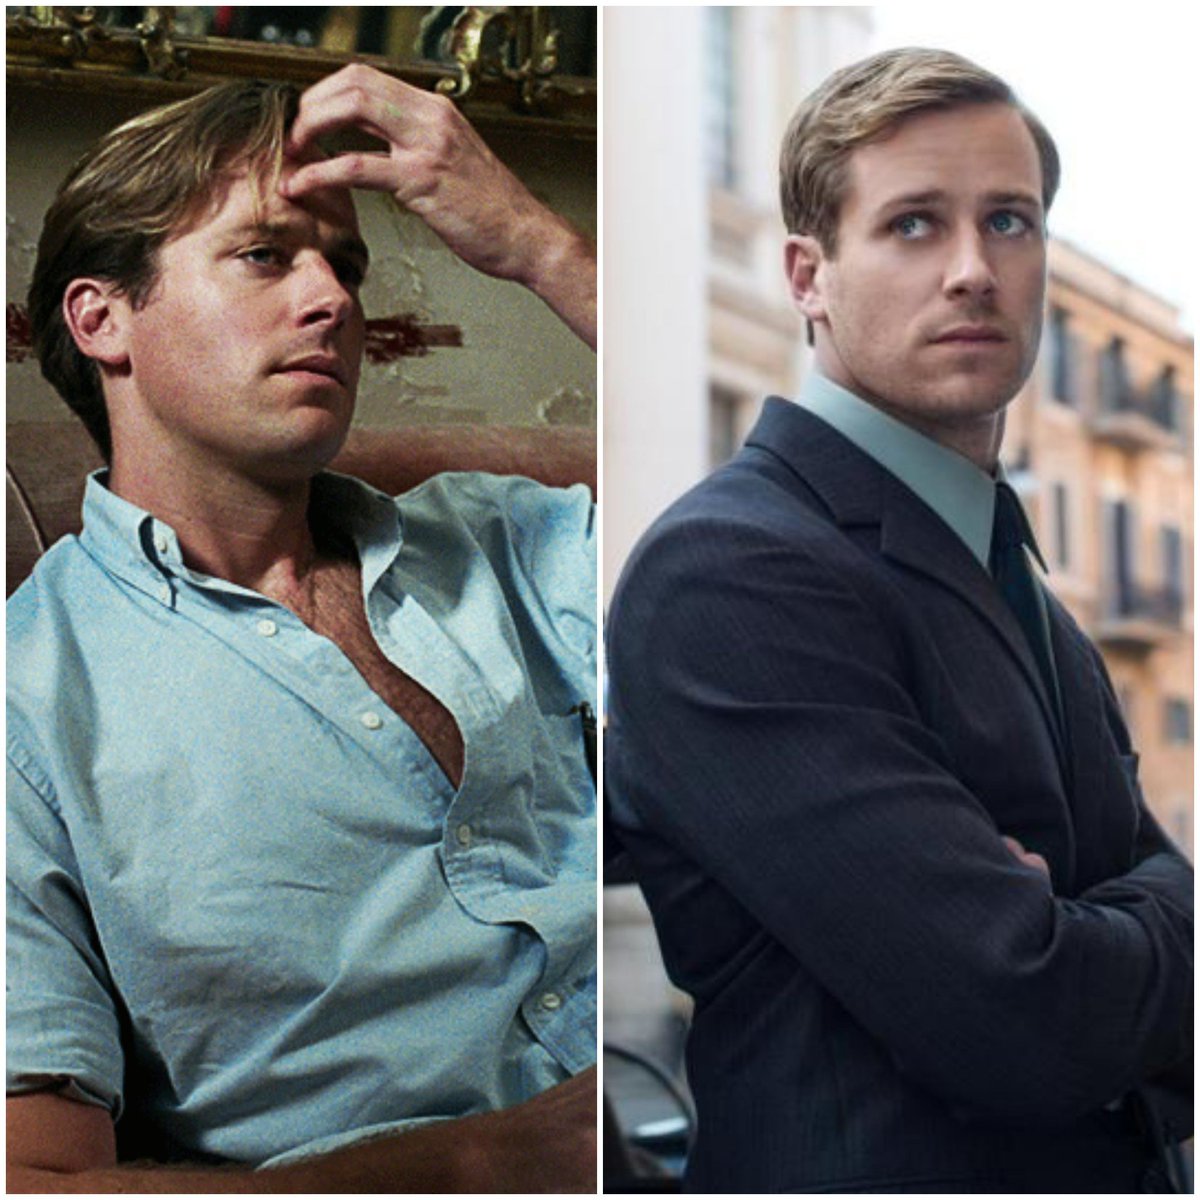 Oliver and Illya, we miss you and we are waiting for you 💙
#ArmieHammer 
#CallMeByYourName
#TheManFromUncle